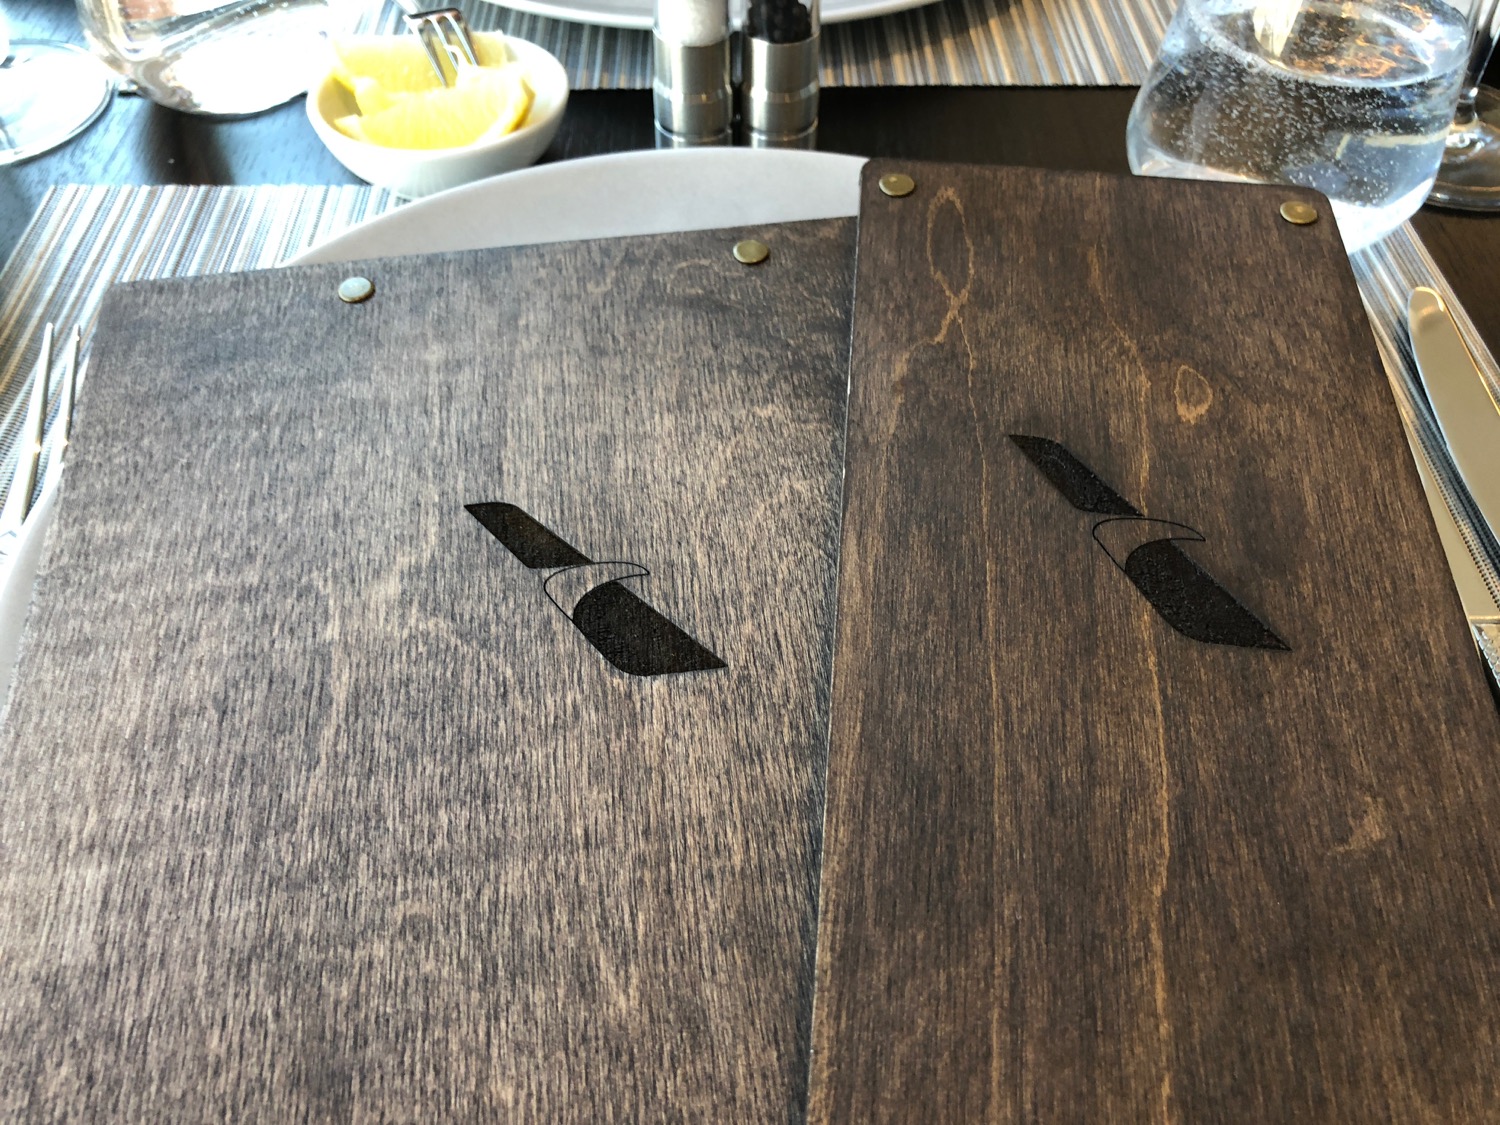 a wooden table with knife engraved on it